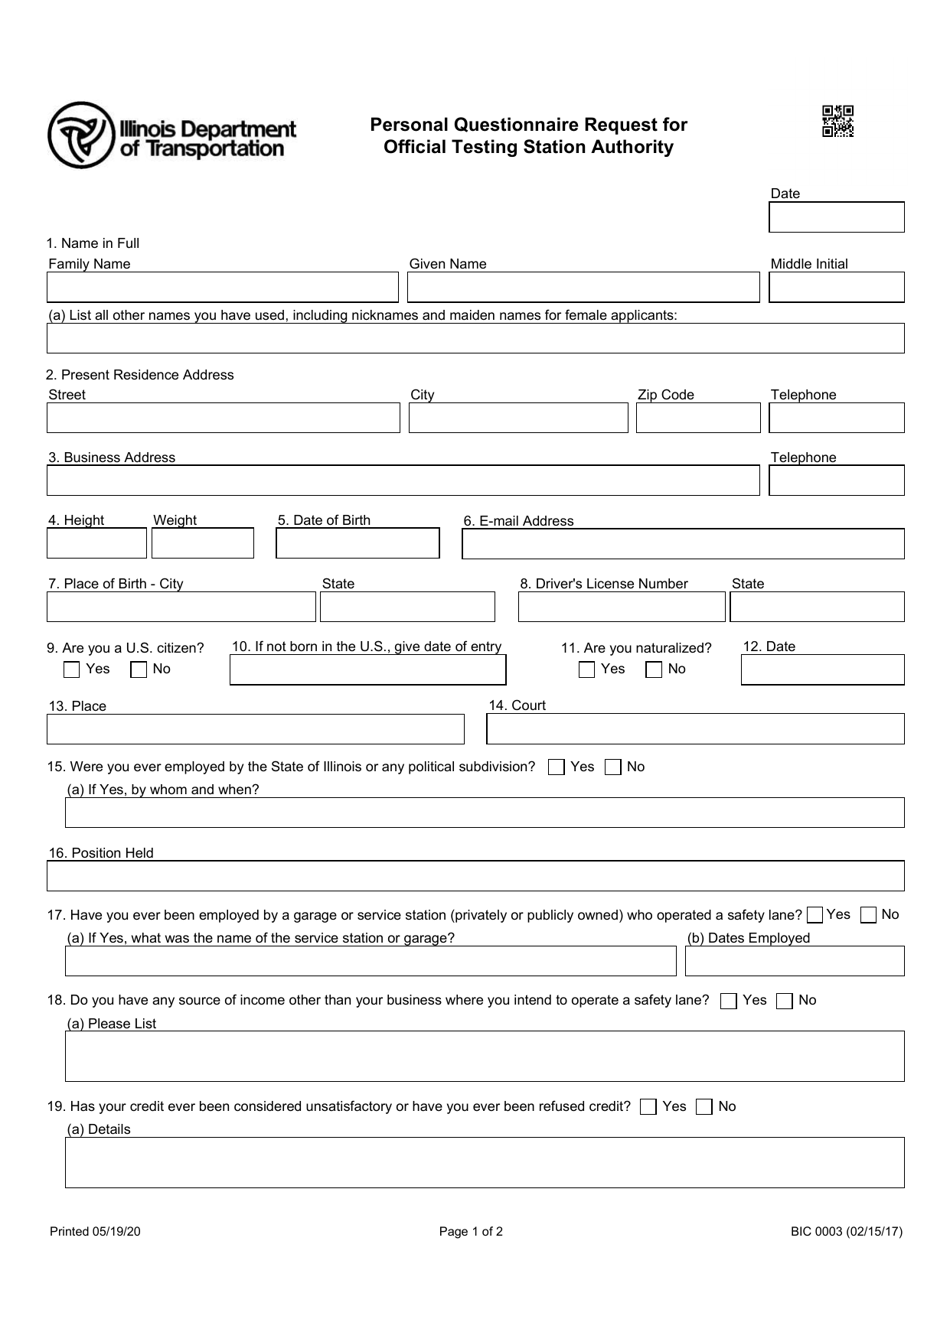 Form BIC0003 Personal Questionnaire Request for Official Testing Station Authority - Illinois, Page 1